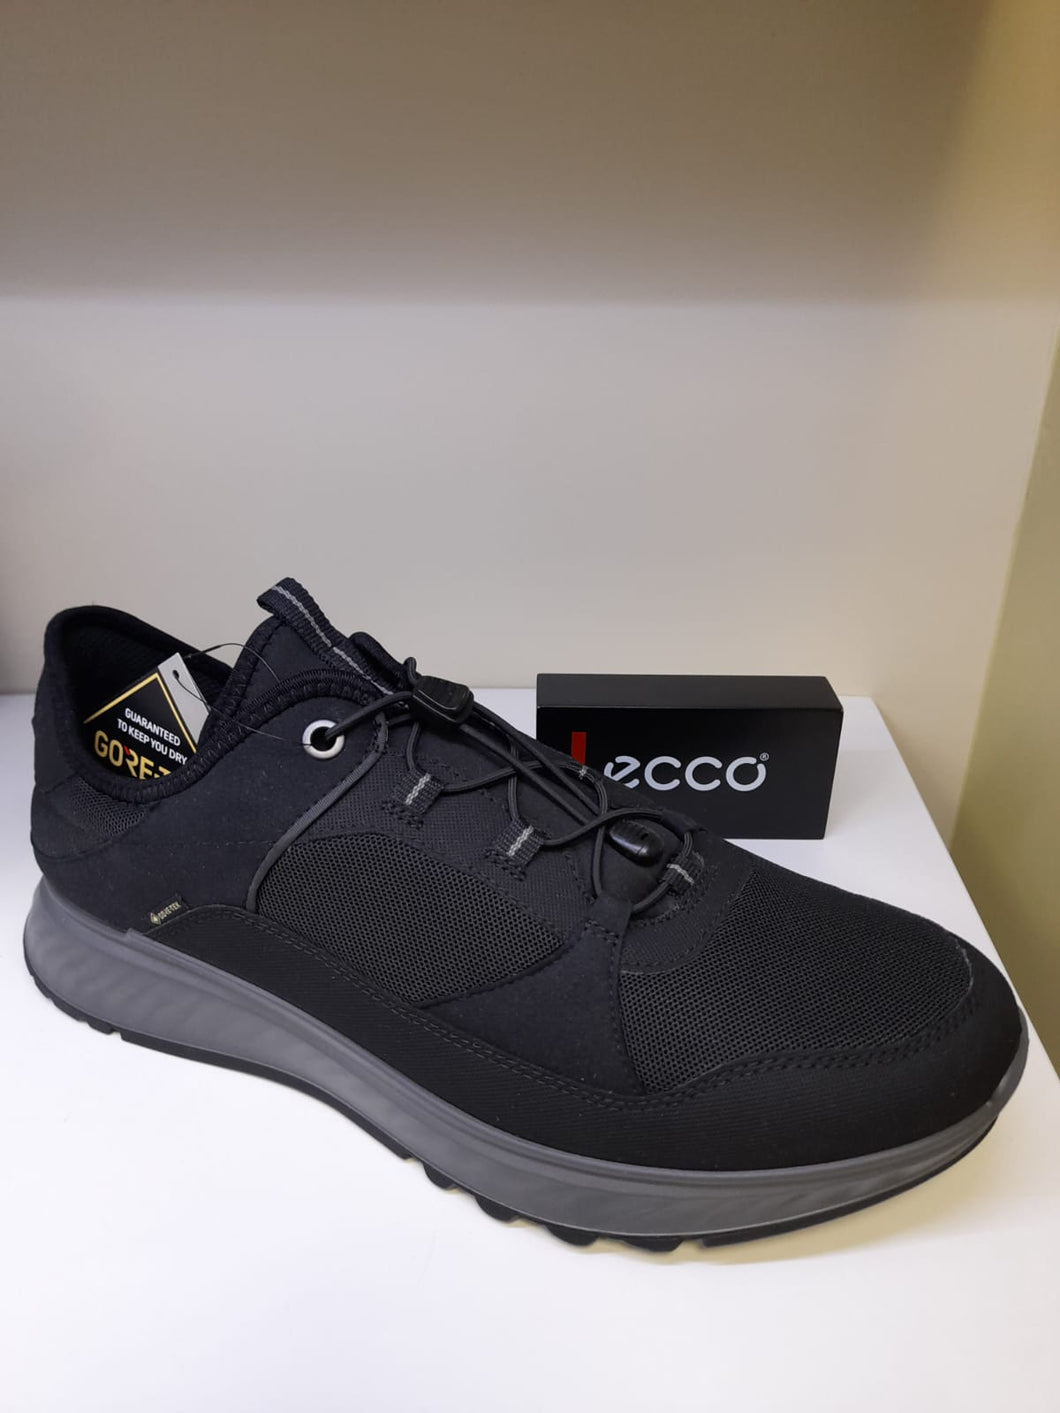 Ecco Mens Exostride Trainer - Black Fabric Upper - GoreTex Lining - Elasticated Lace Fastening - Removable Insole